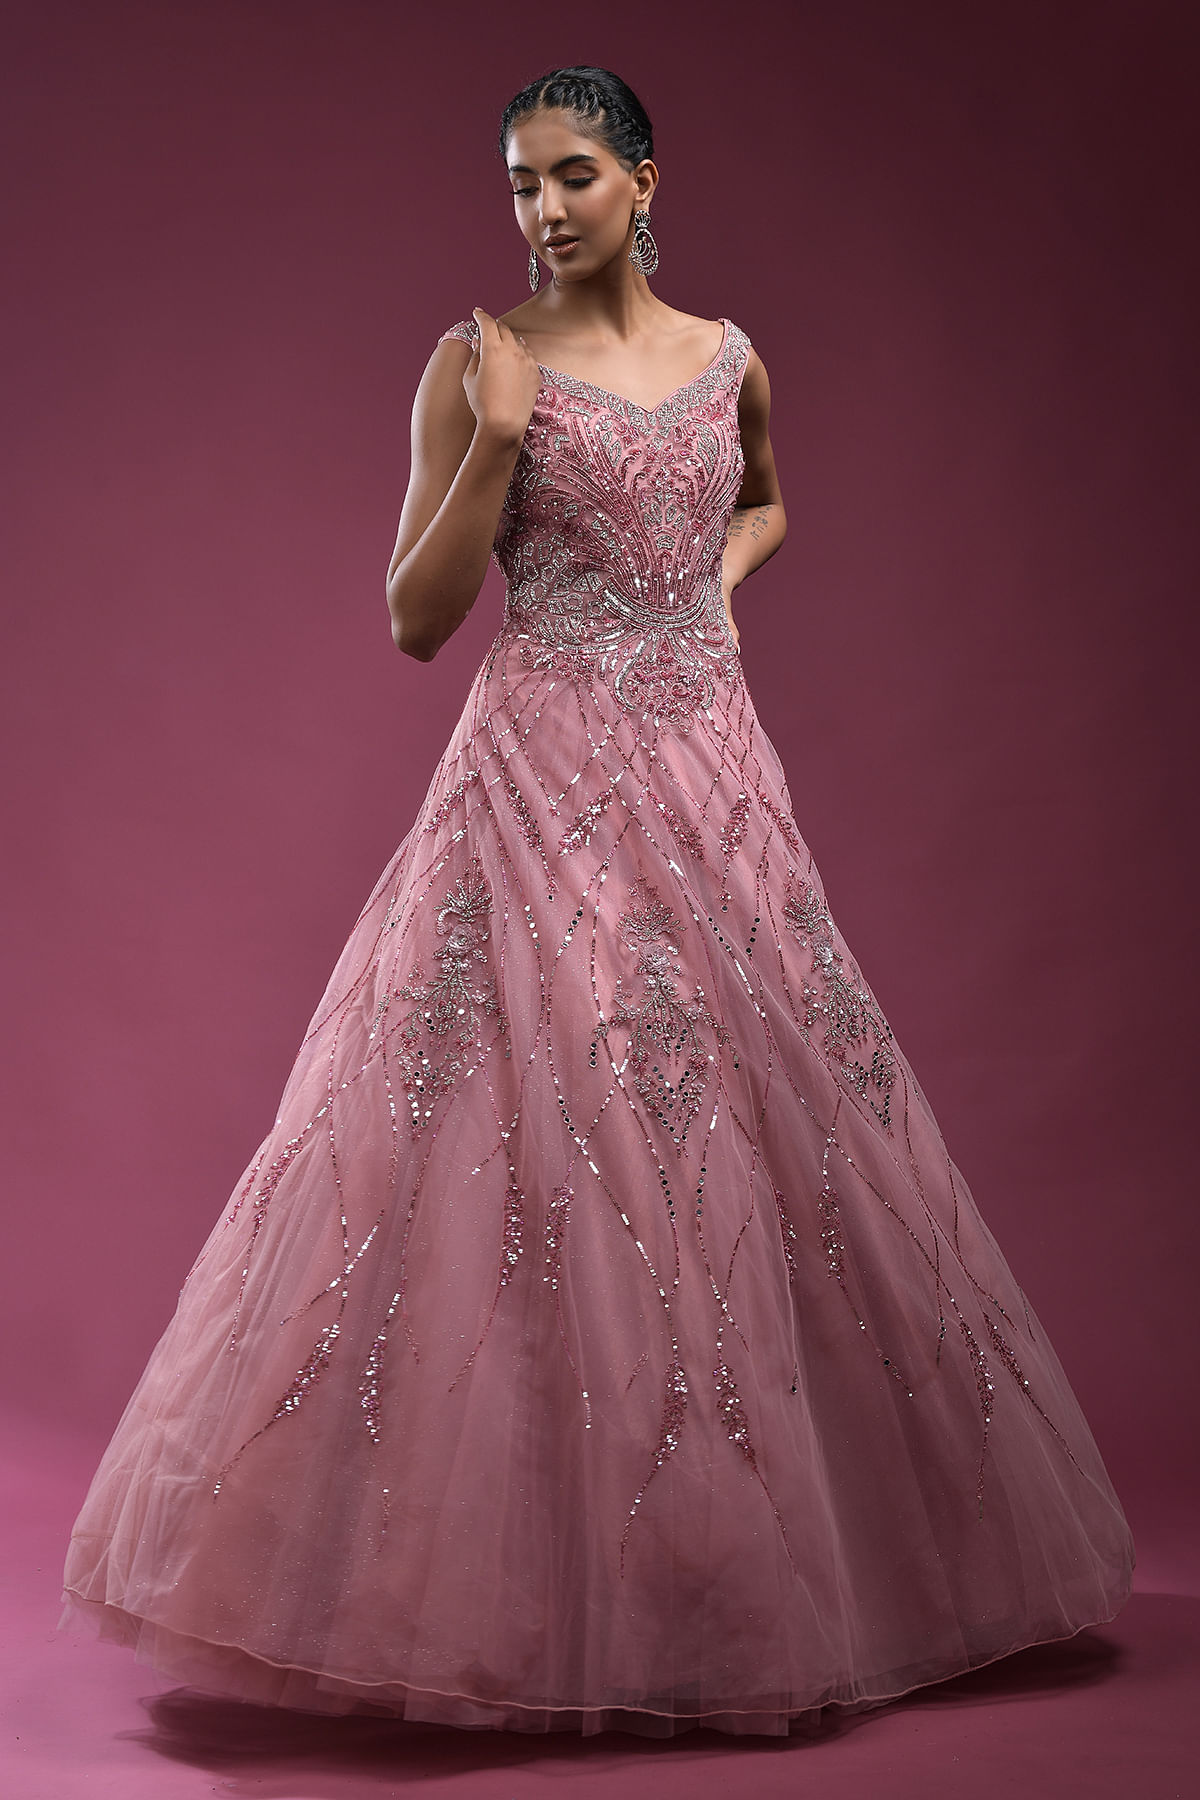 Luxury Blushing Pink Ballgown Pink Wedding Dress With Illusion Top, Long  Sleeves, Lace, And Vintage Bridal Goss Customizable With Real Photos From  Totallymodest, $263.23 | DHgate.Com